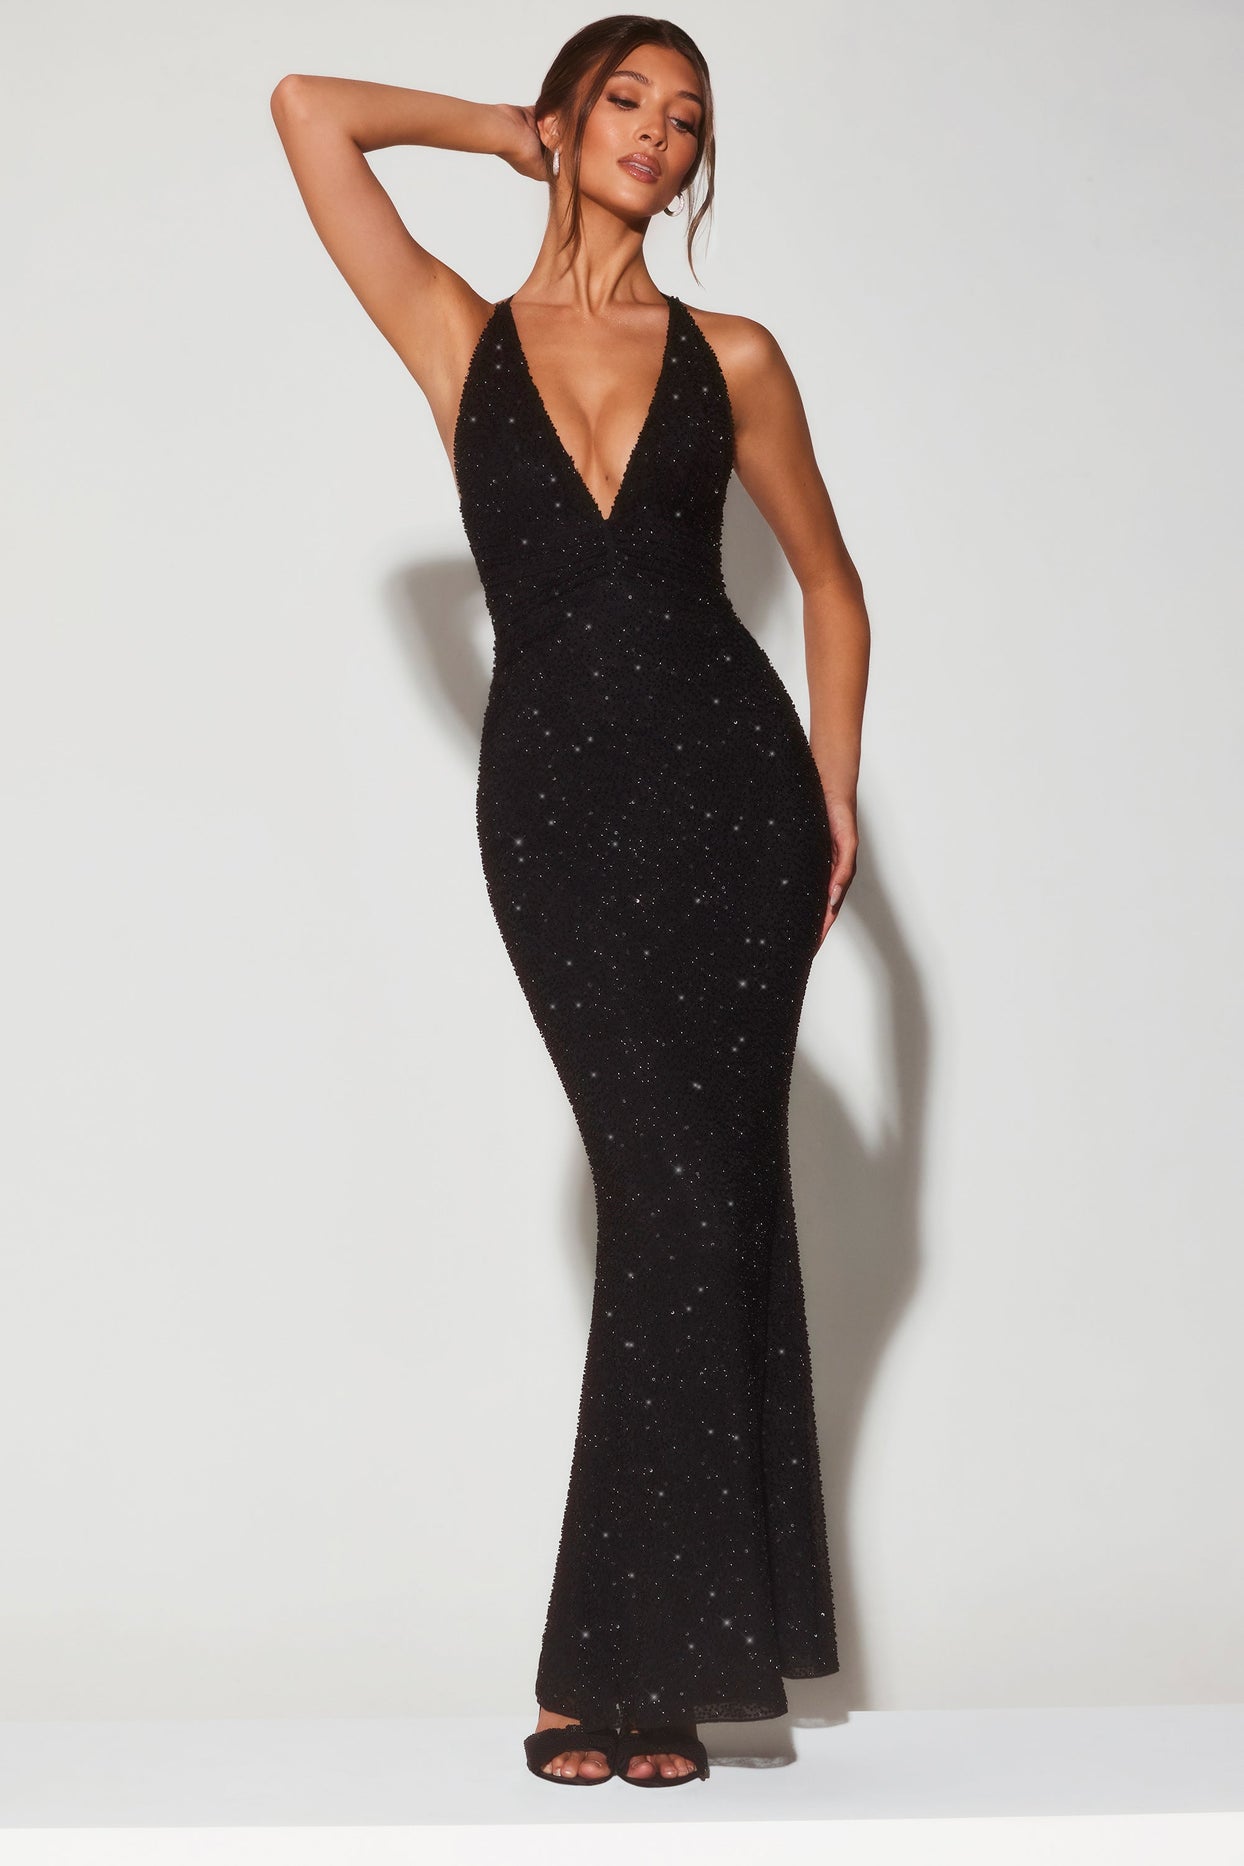 Haley Black Chiffon Gown with Plunging Neckline